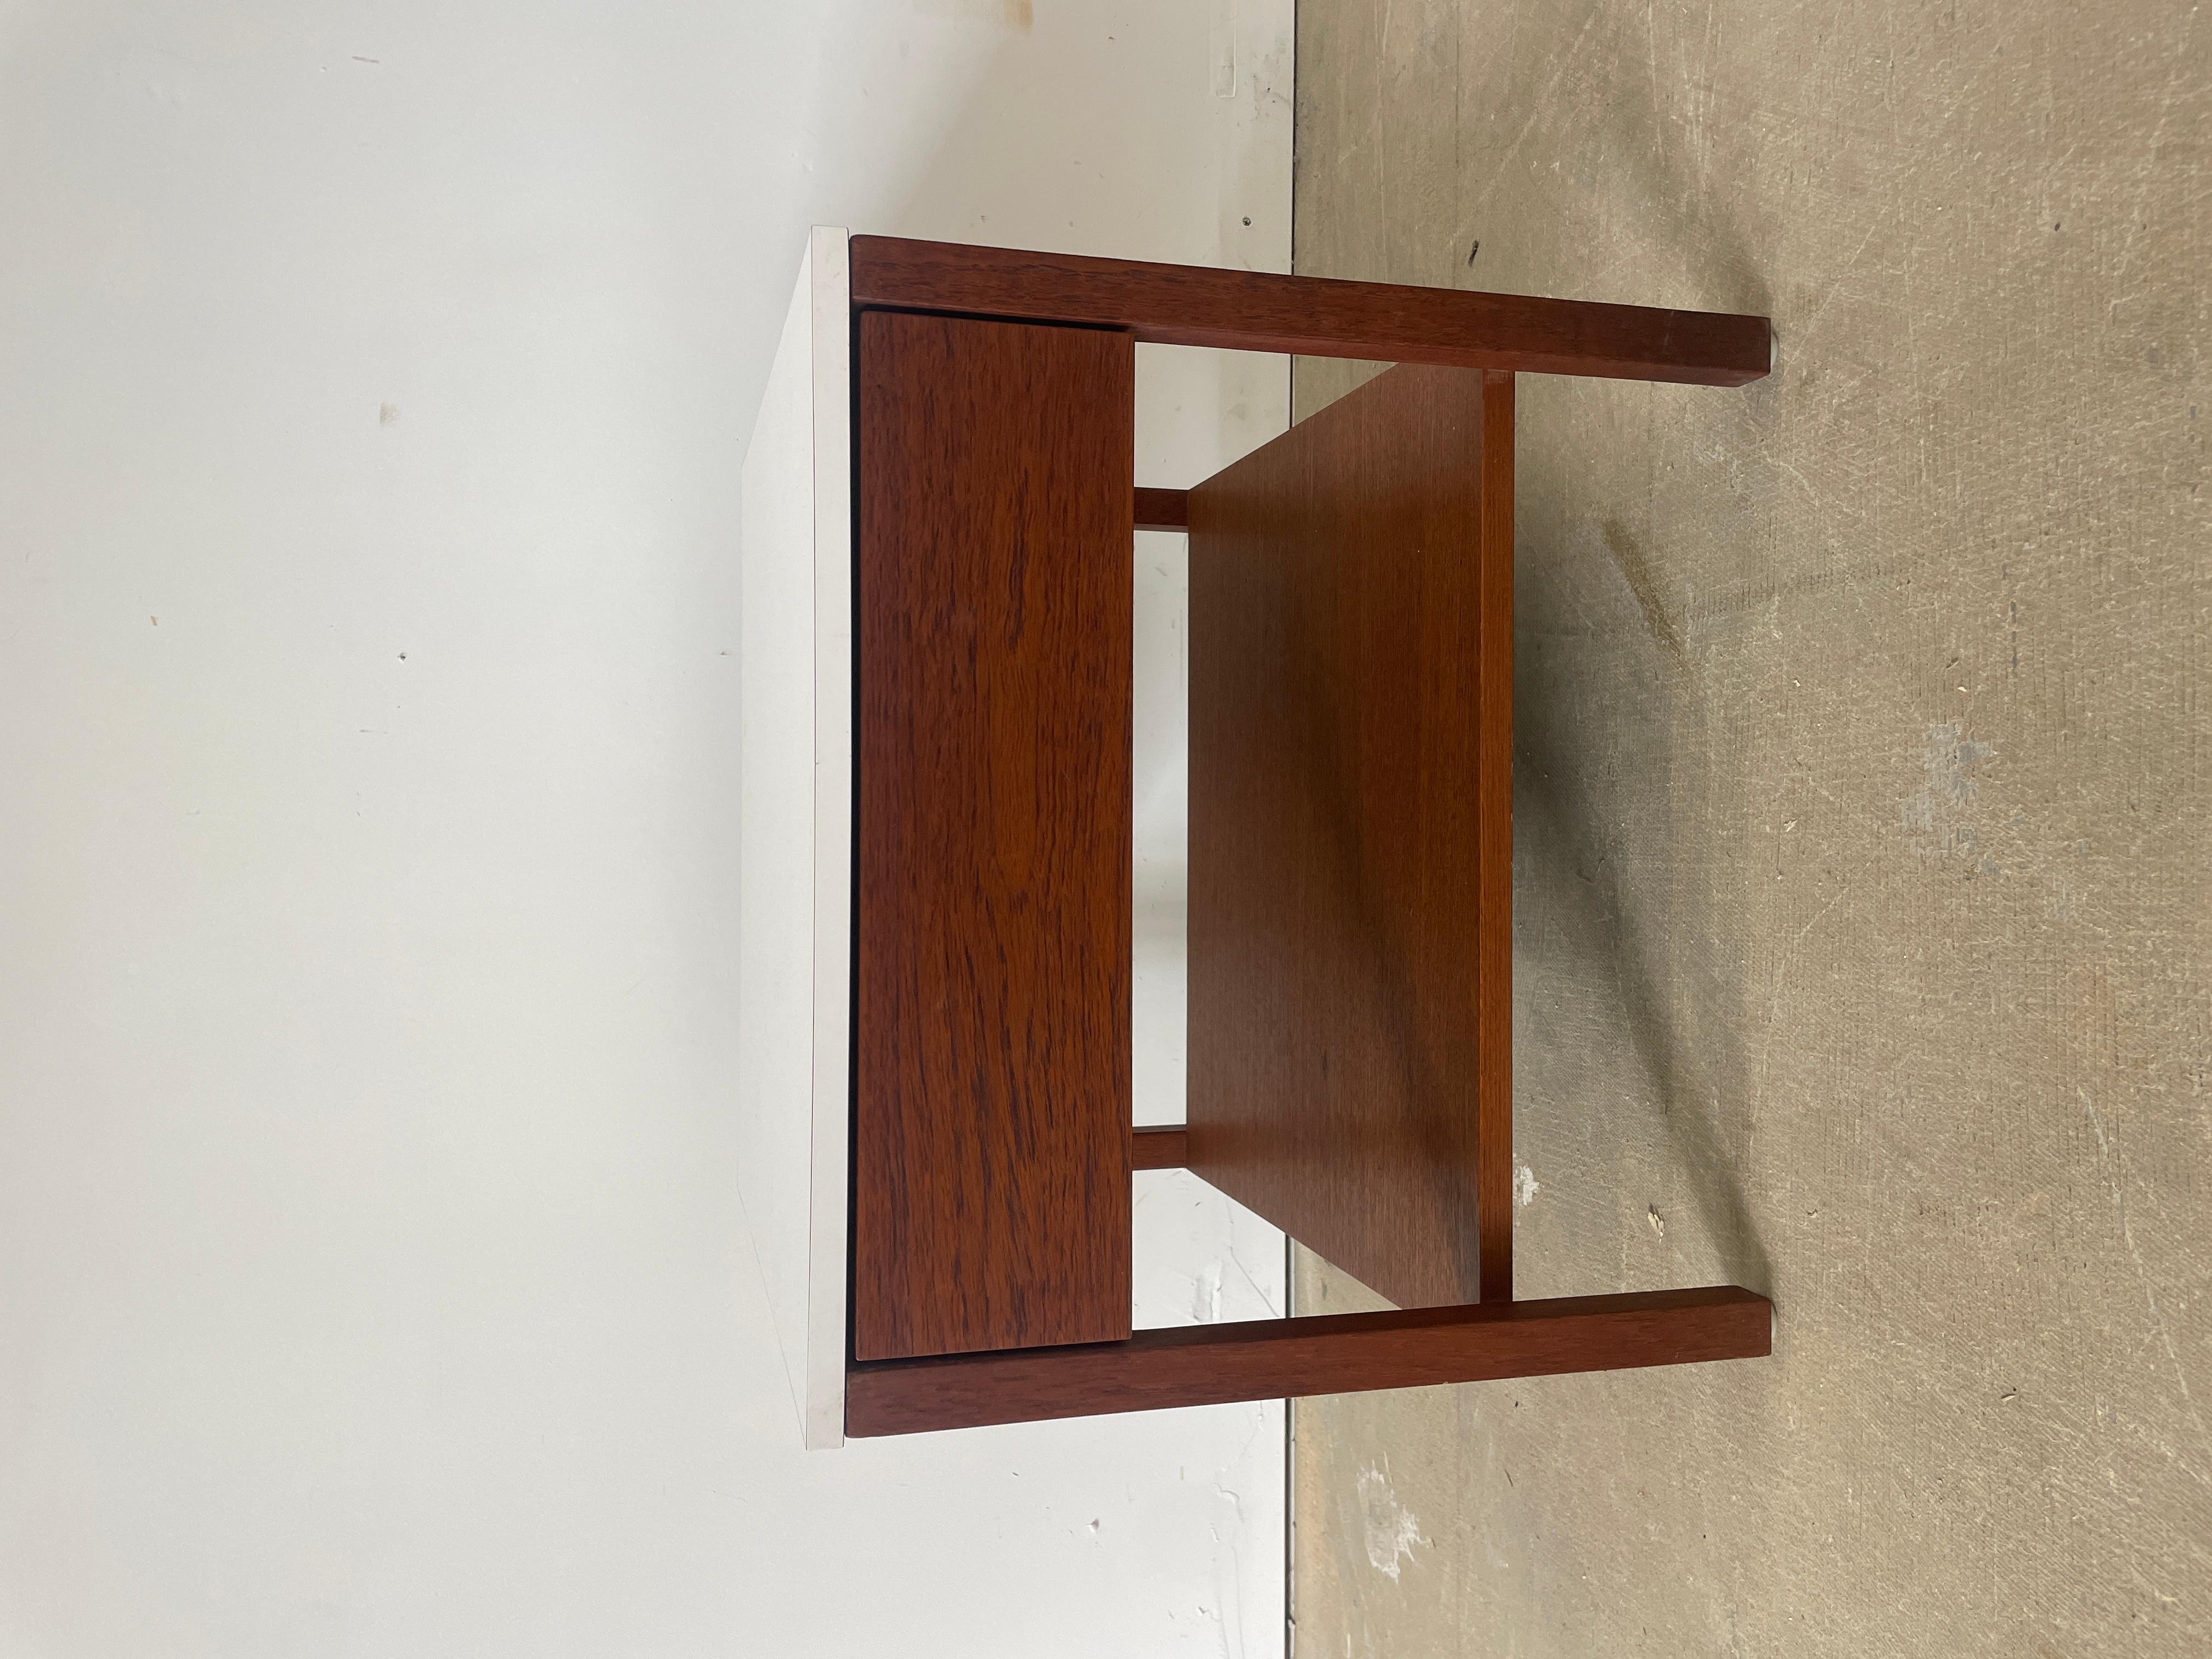 Florence Knoll side table or nightstand in Teak fro Knoll Associates Inc., 1950s. One of many impeccably minimalist Florence Knoll designs she created to 